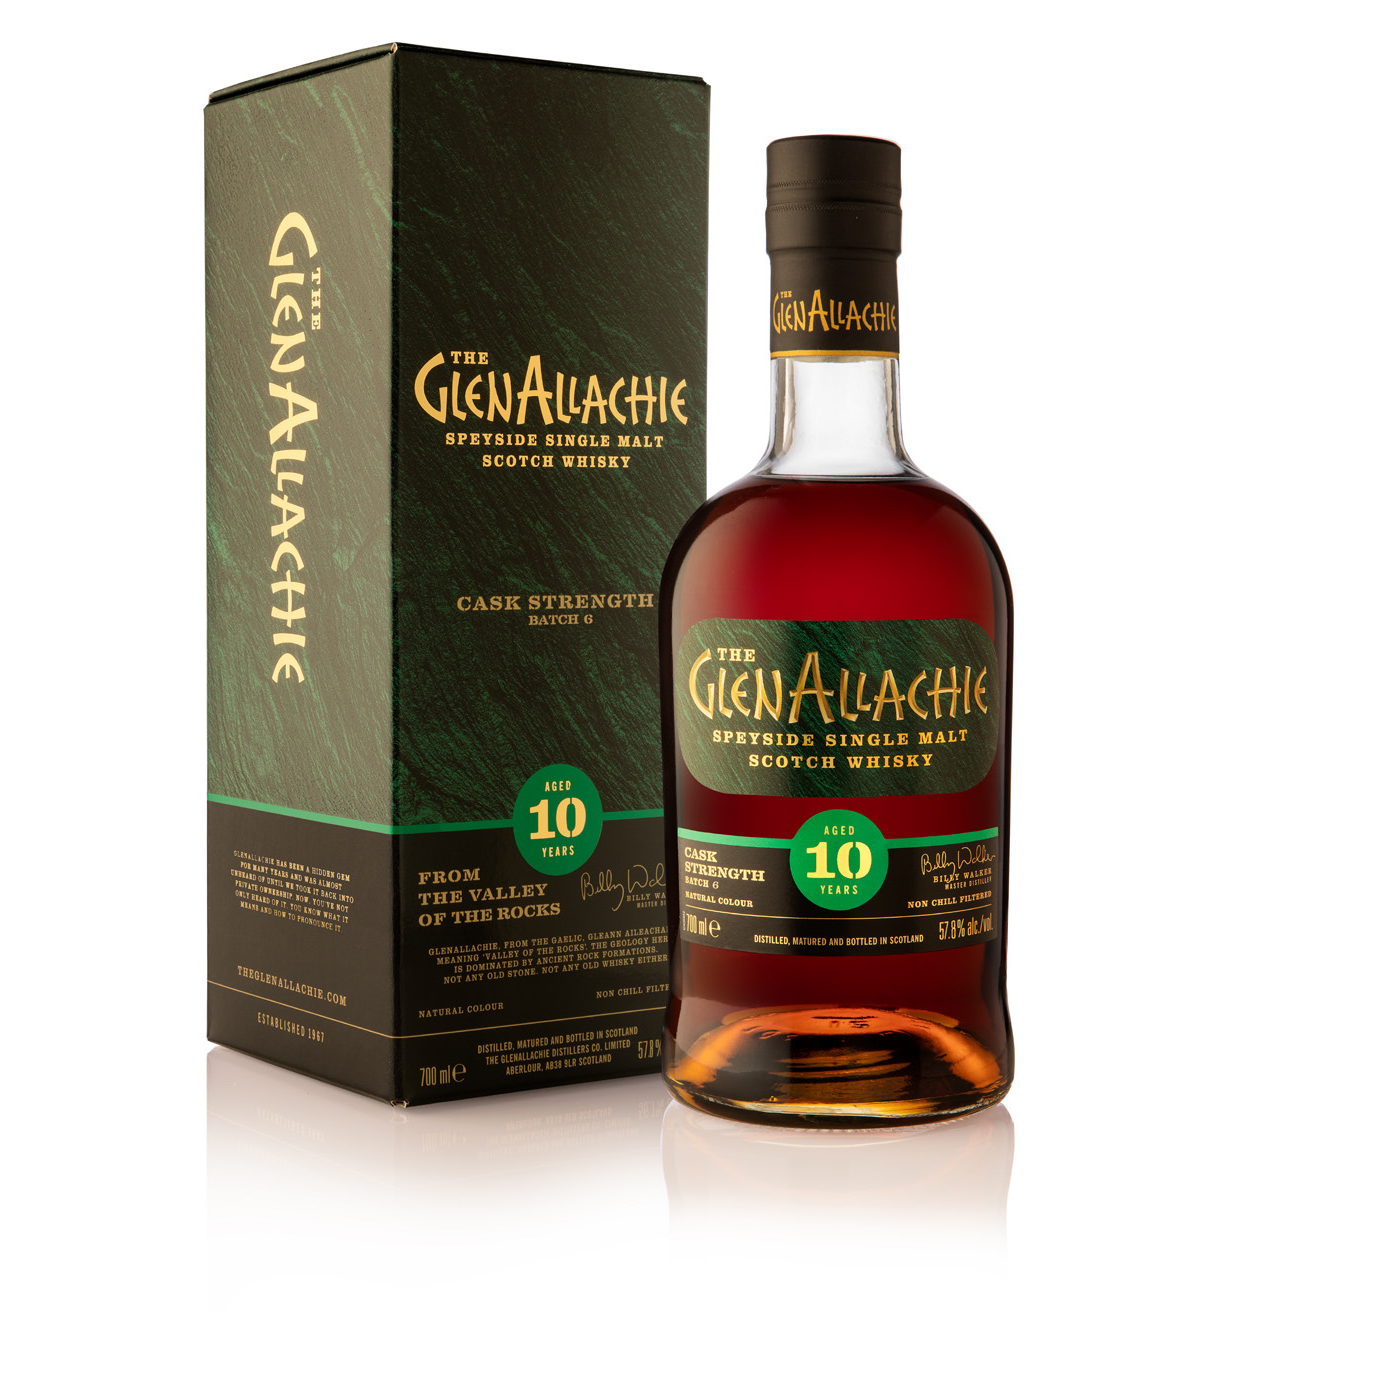 GlenAllachie 10 Year Old Cask Strength - Batch 6 -Single Malt Scotch Whisky-Single Malt Scotch Whisky-5060568323640-Fountainhall Wines